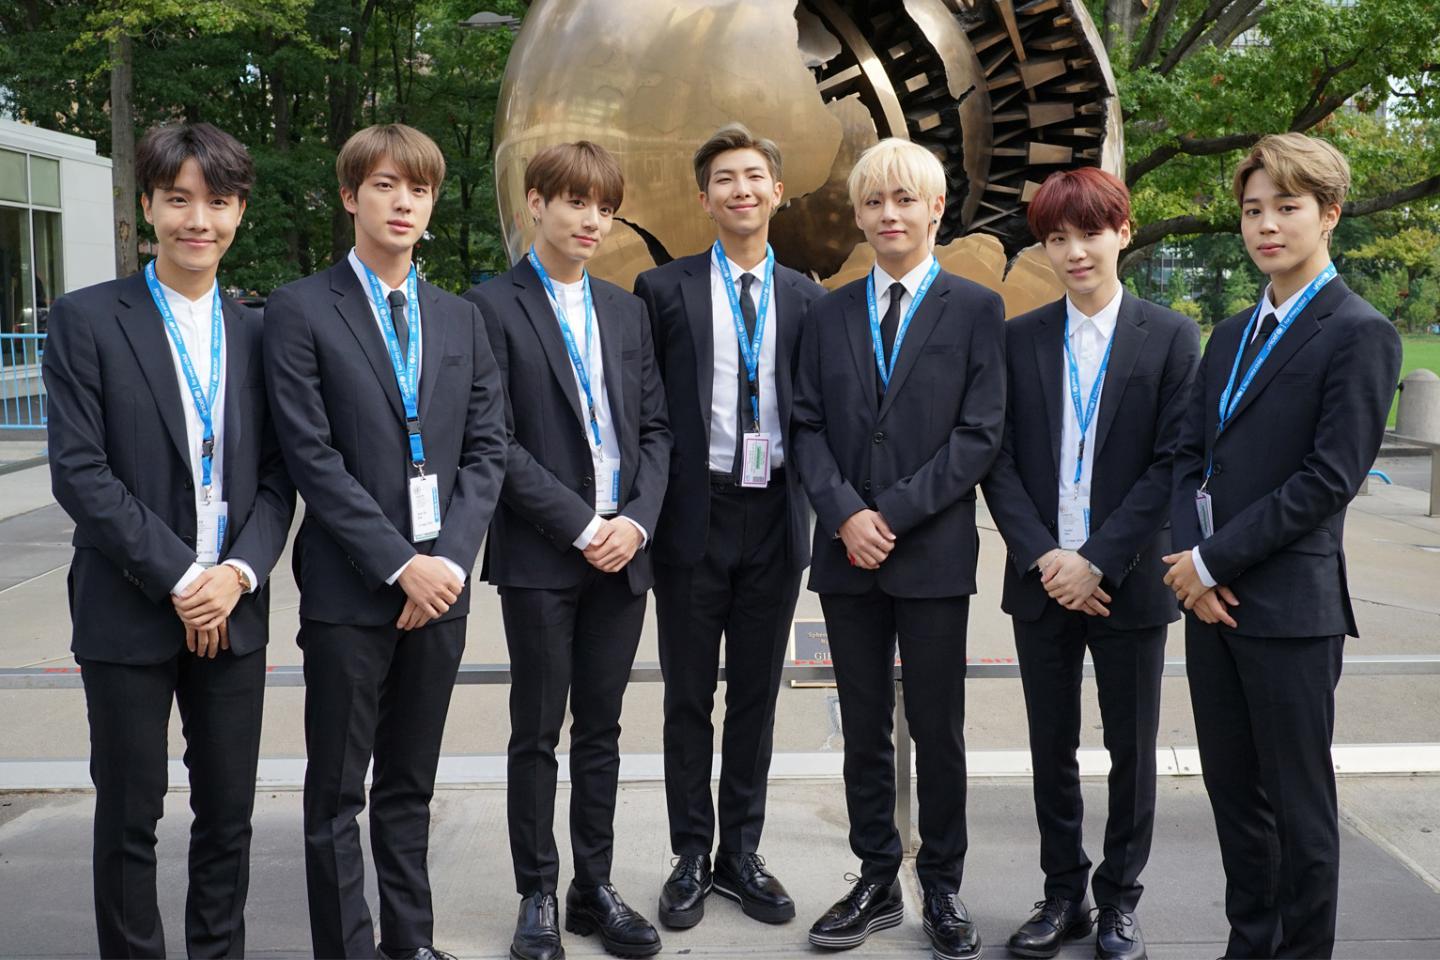 BTS, K-pop icons, appointed South Korean presidential special envoys ahead  of U.N. General Assembly - The Washington Post